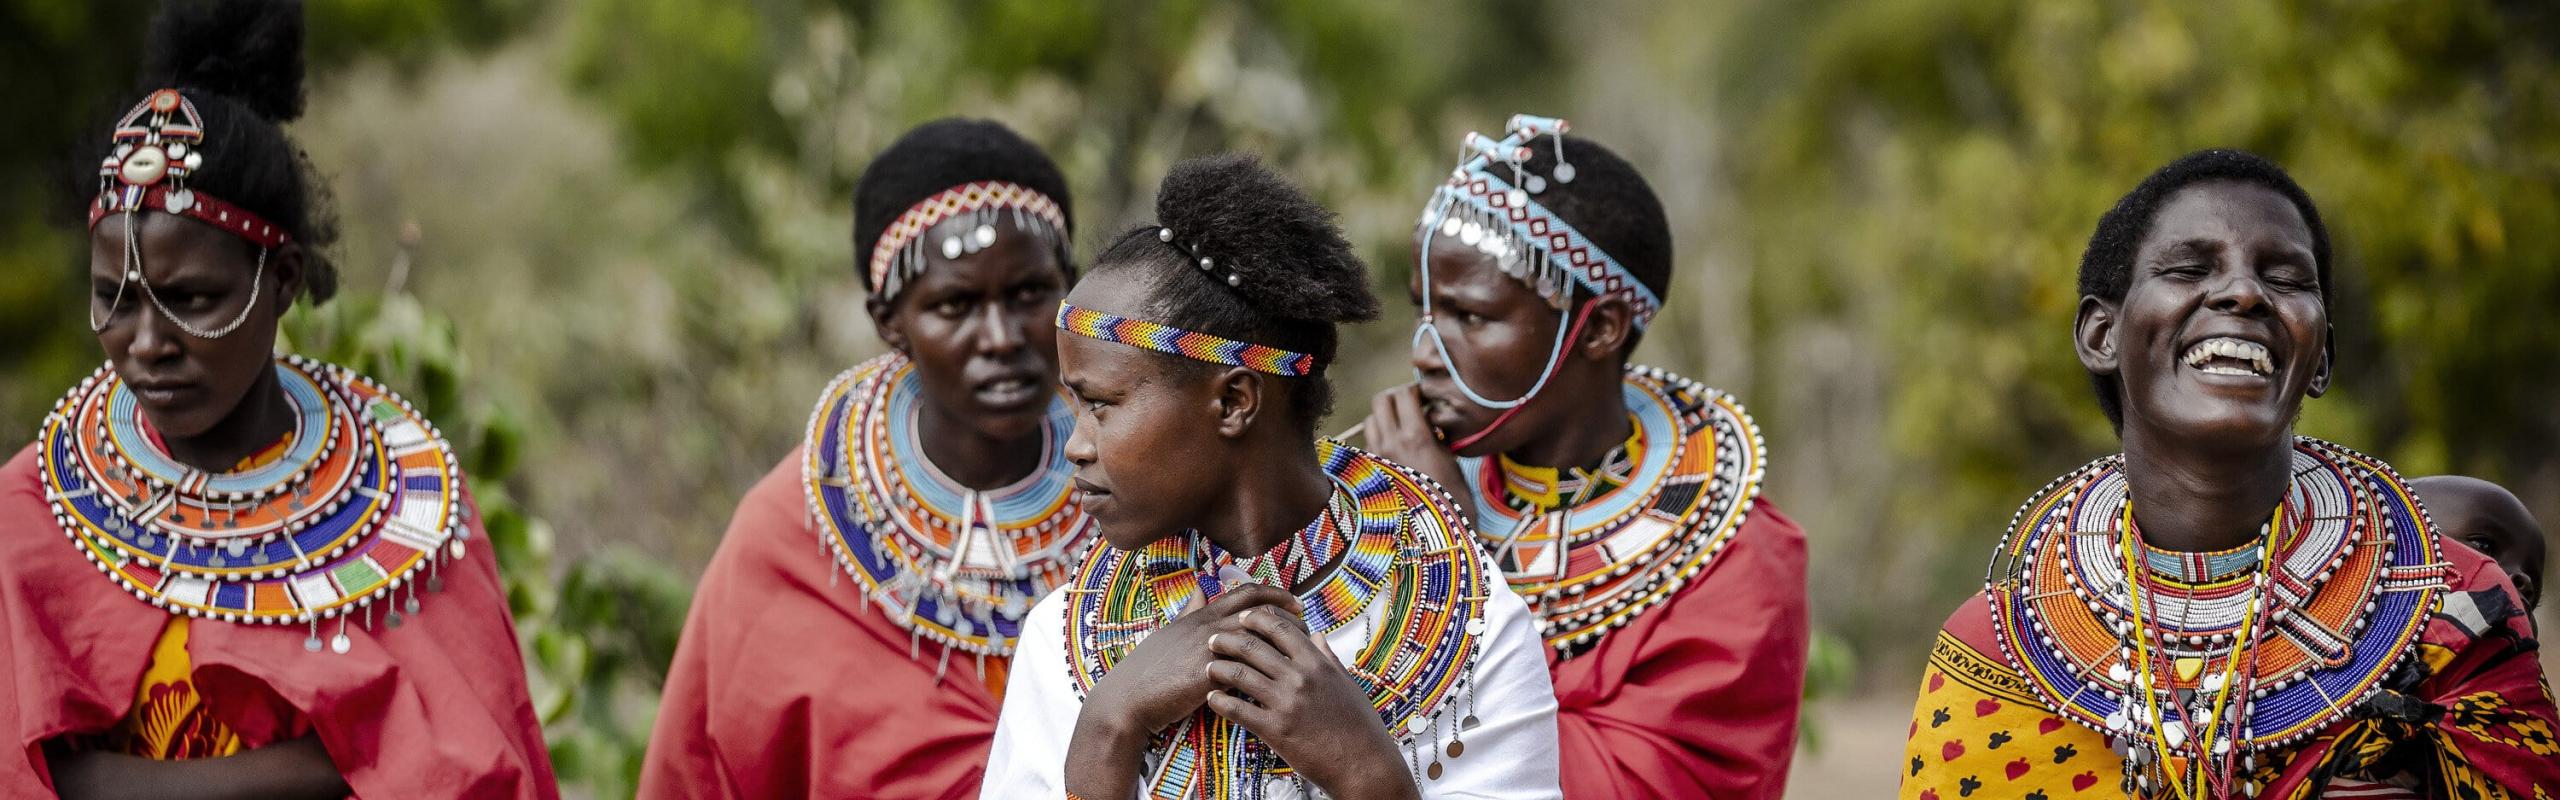 Five members of the Masai community stand together wearing brightly colored traditional clothing and laughing.